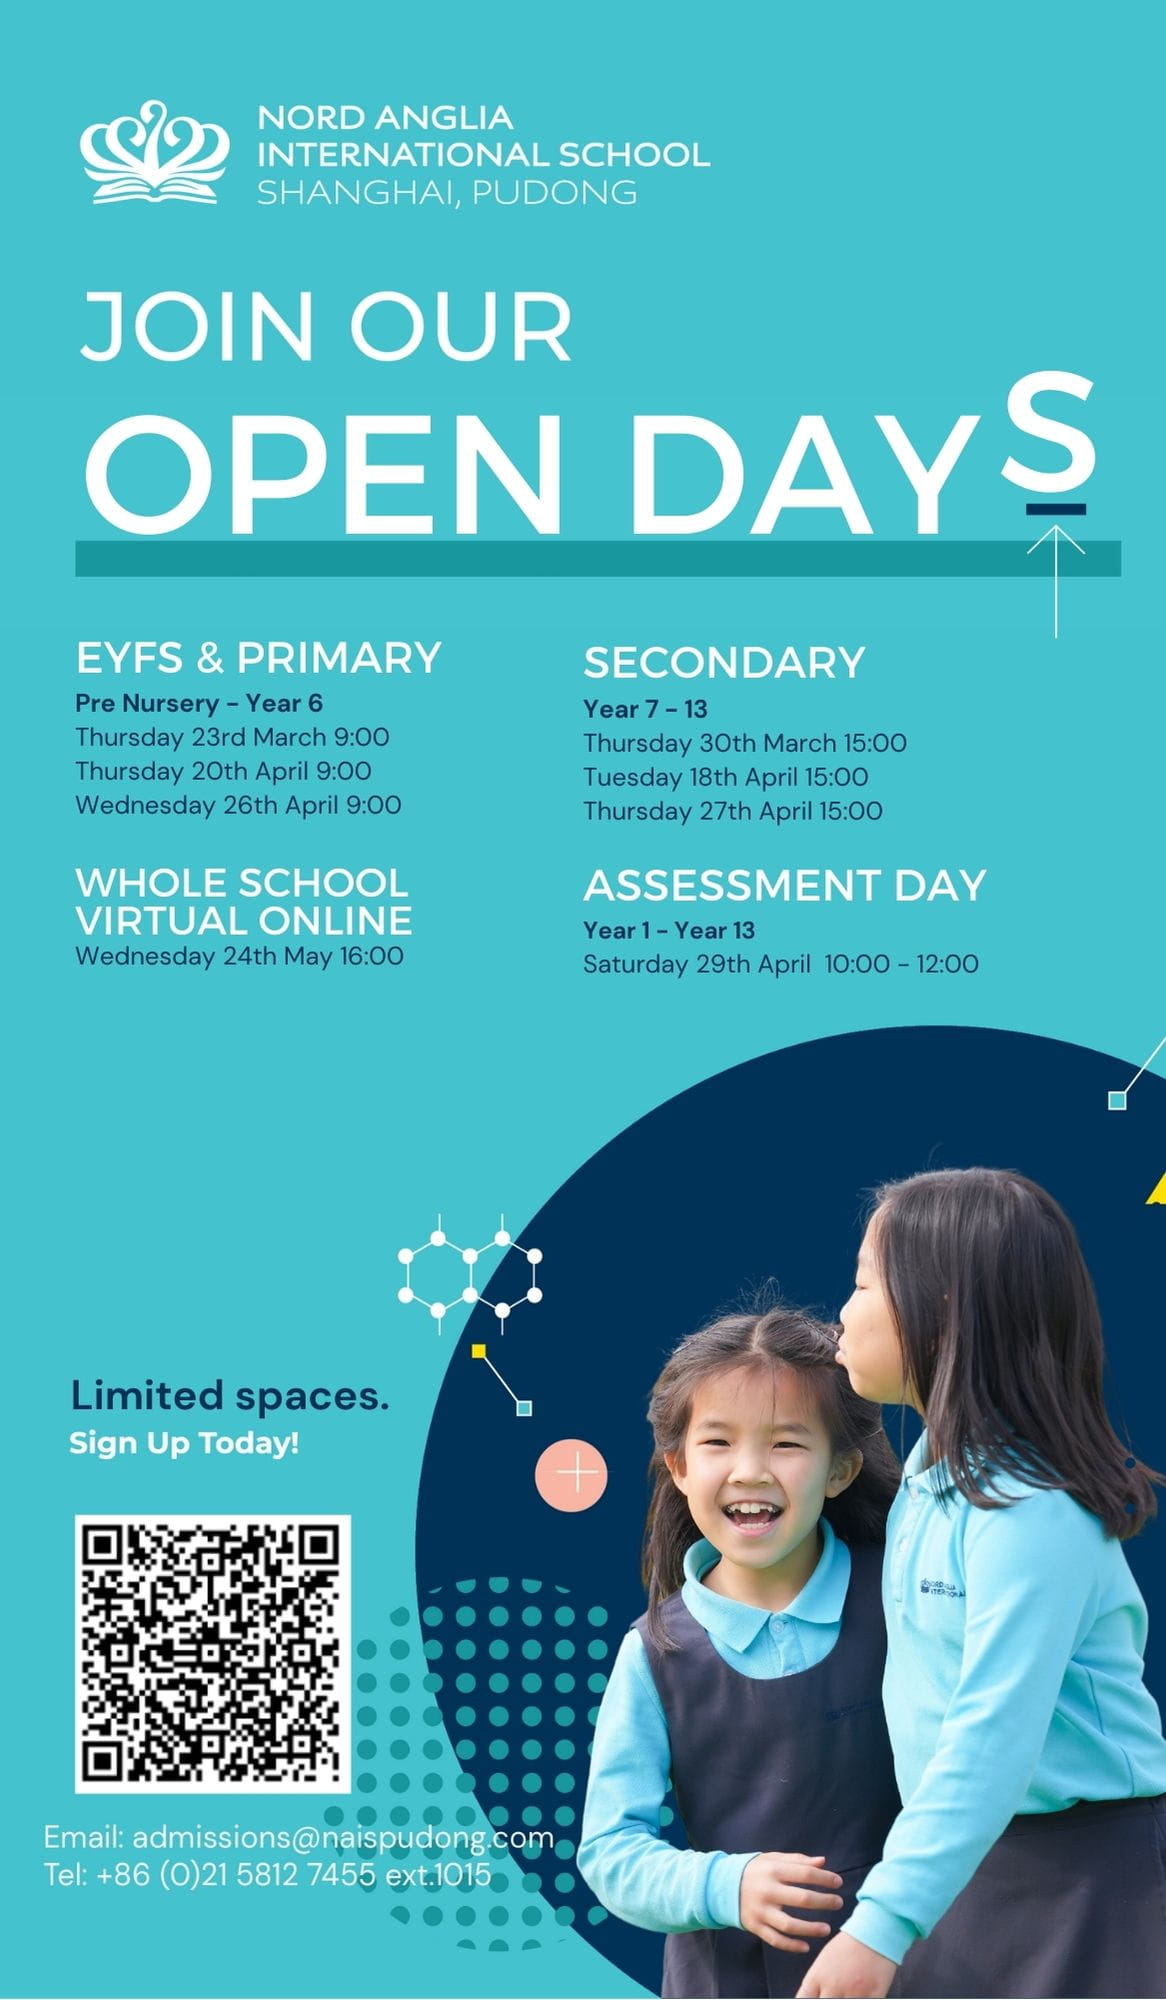 OPEN DAY | Register Now for the 2023-2024 School Year - open day